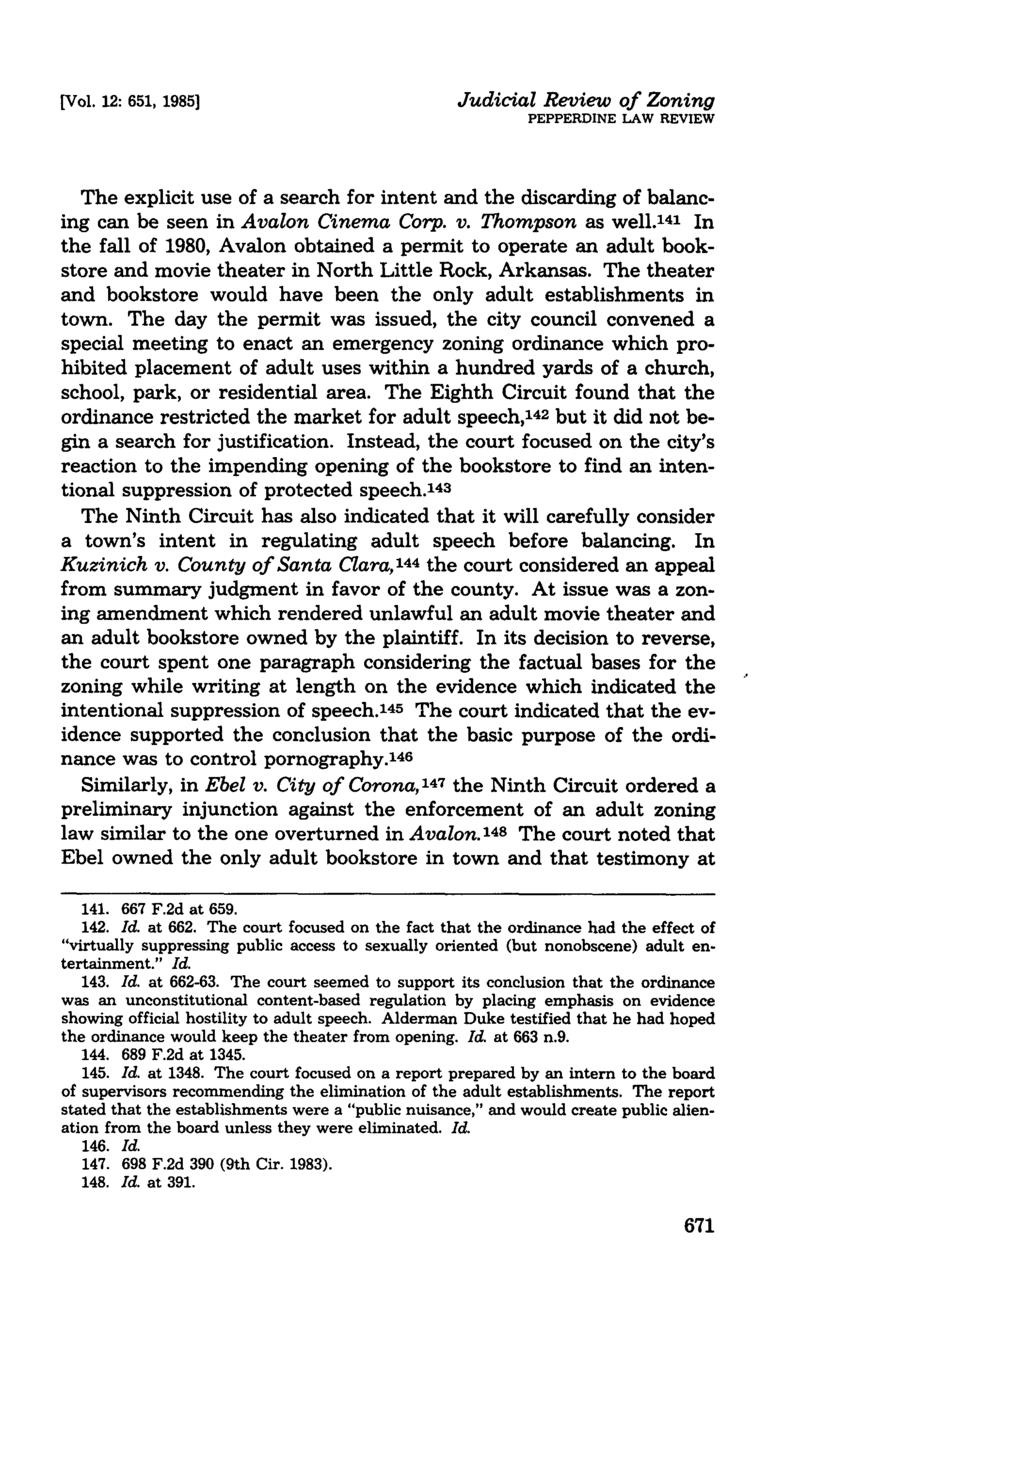 [Vol. 12: 651, 1985] Judicial Review of Zoning PEPPERDINE LAW REVIEW The explicit use of a search for intent and the discarding of balancing can be seen in Avalon Cinema Corp. v. Thompson as well.